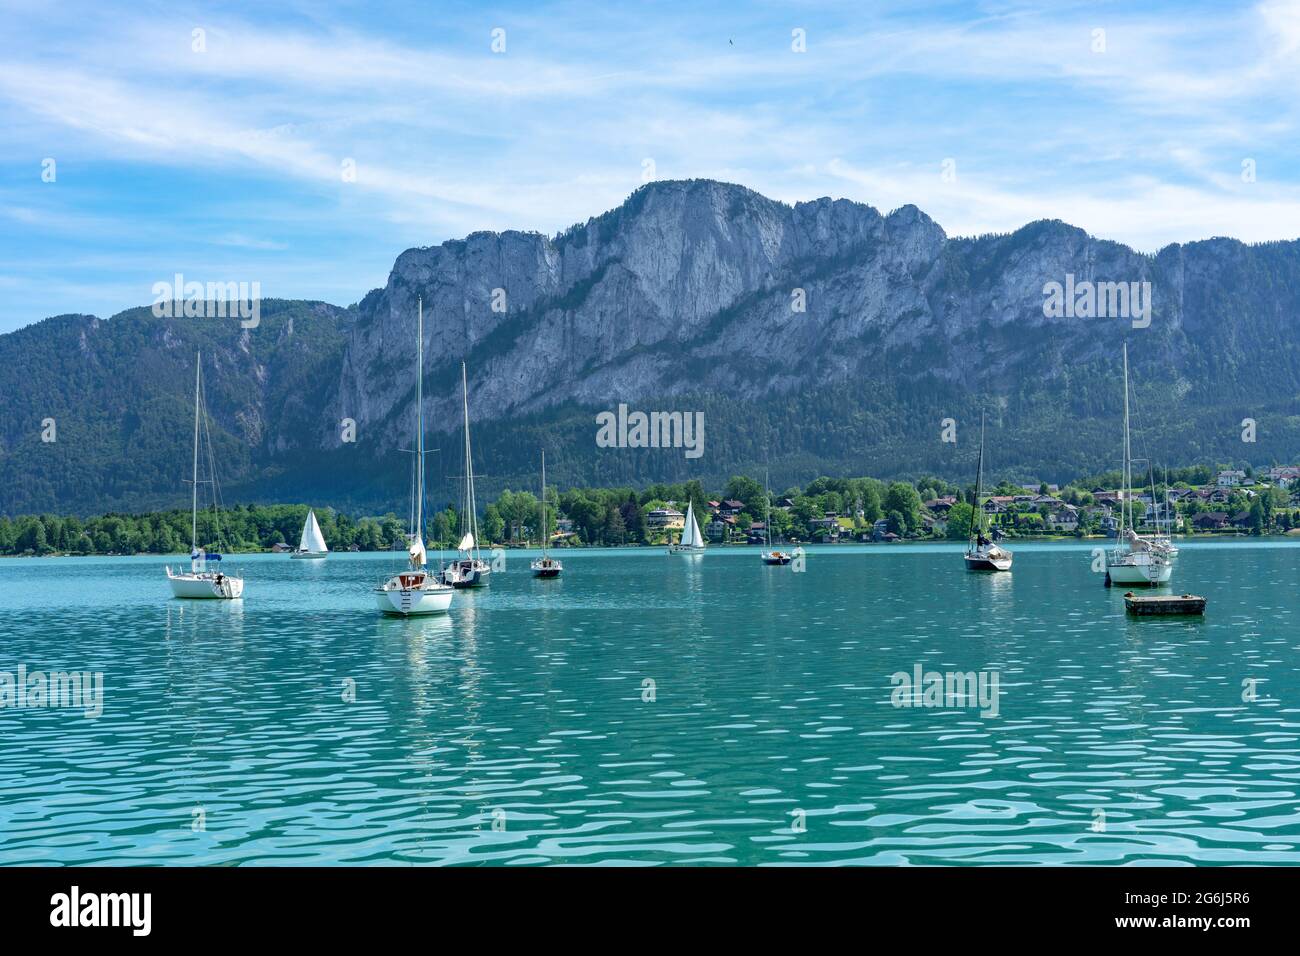 Mondsee with mountains and sailing boats on the water summertime Stock Photo